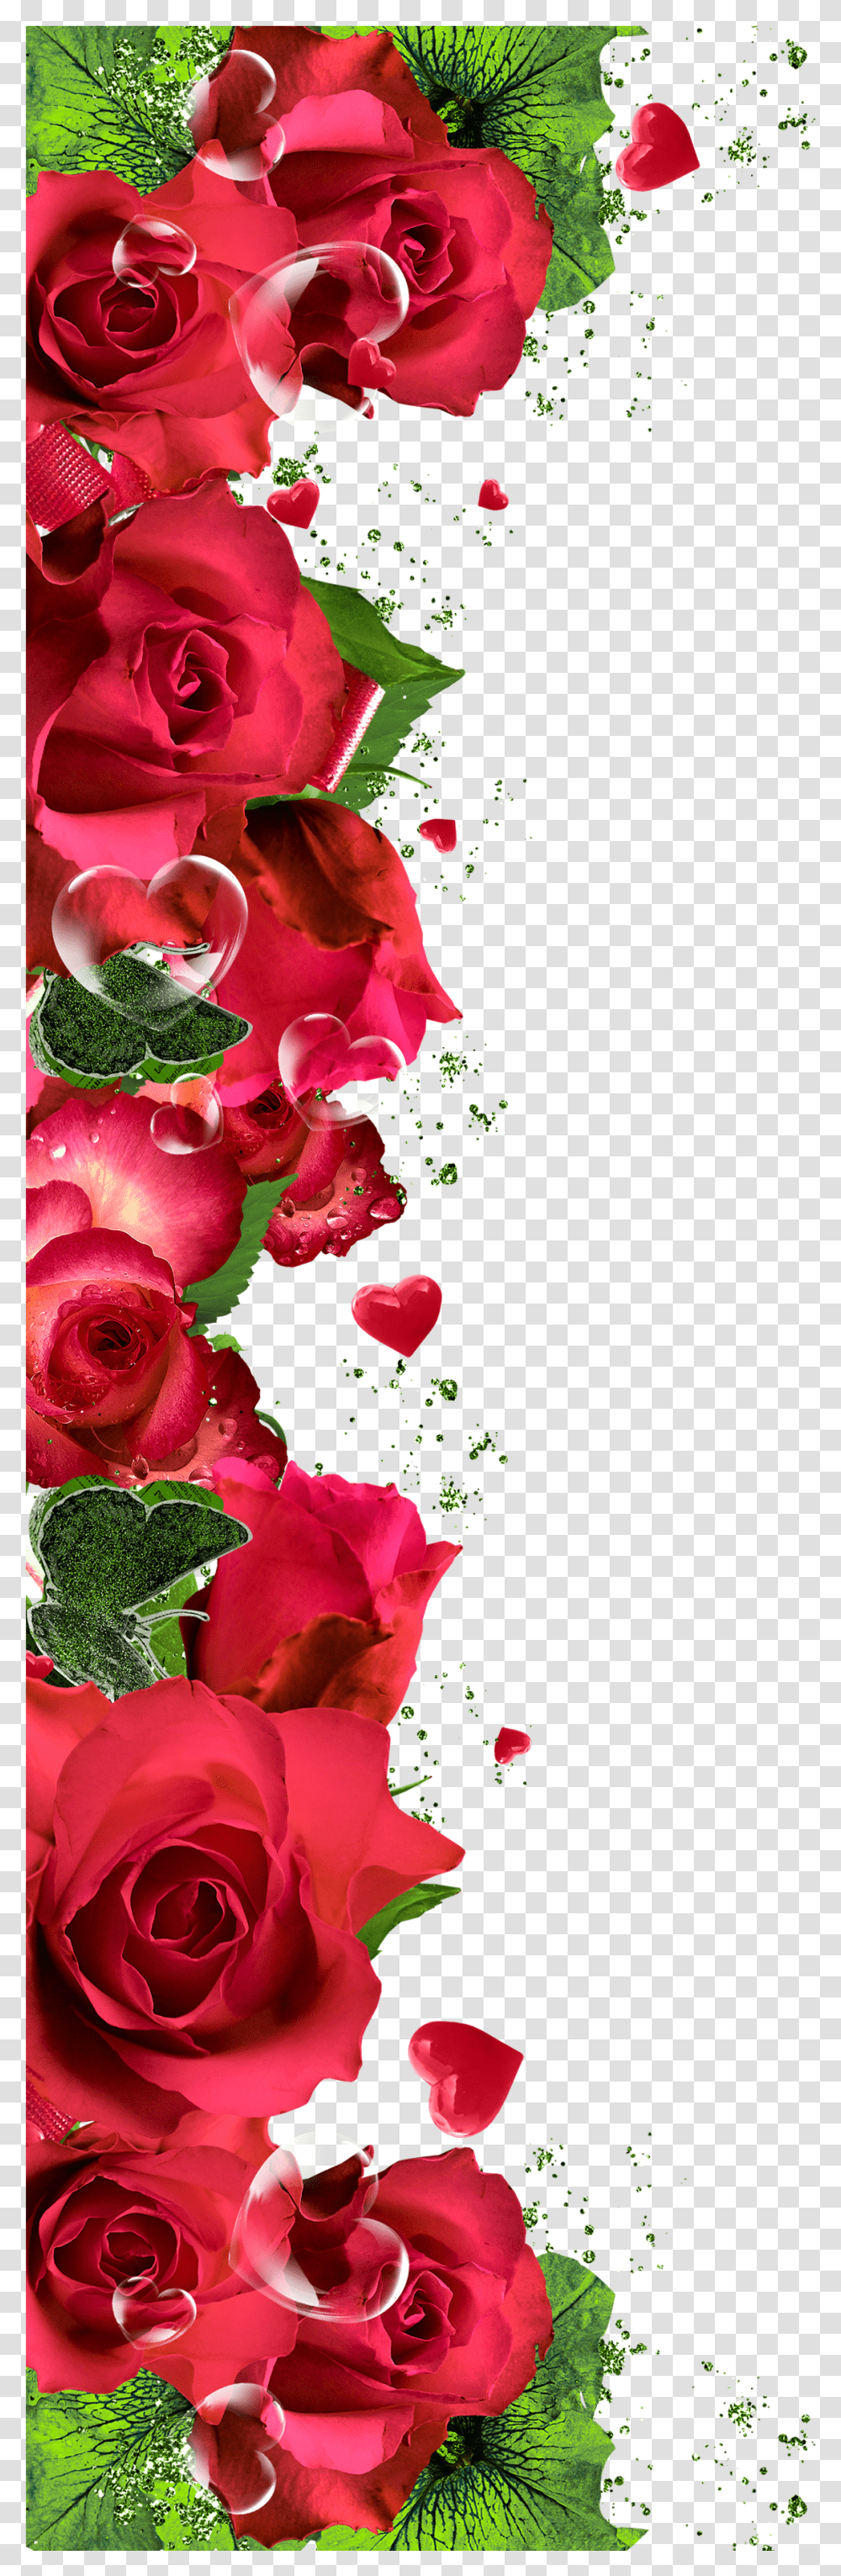 Wallpaper Patterns Wallpaper Backgrounds Iphone Wallpapers Rose Flower Borders Transparent Png